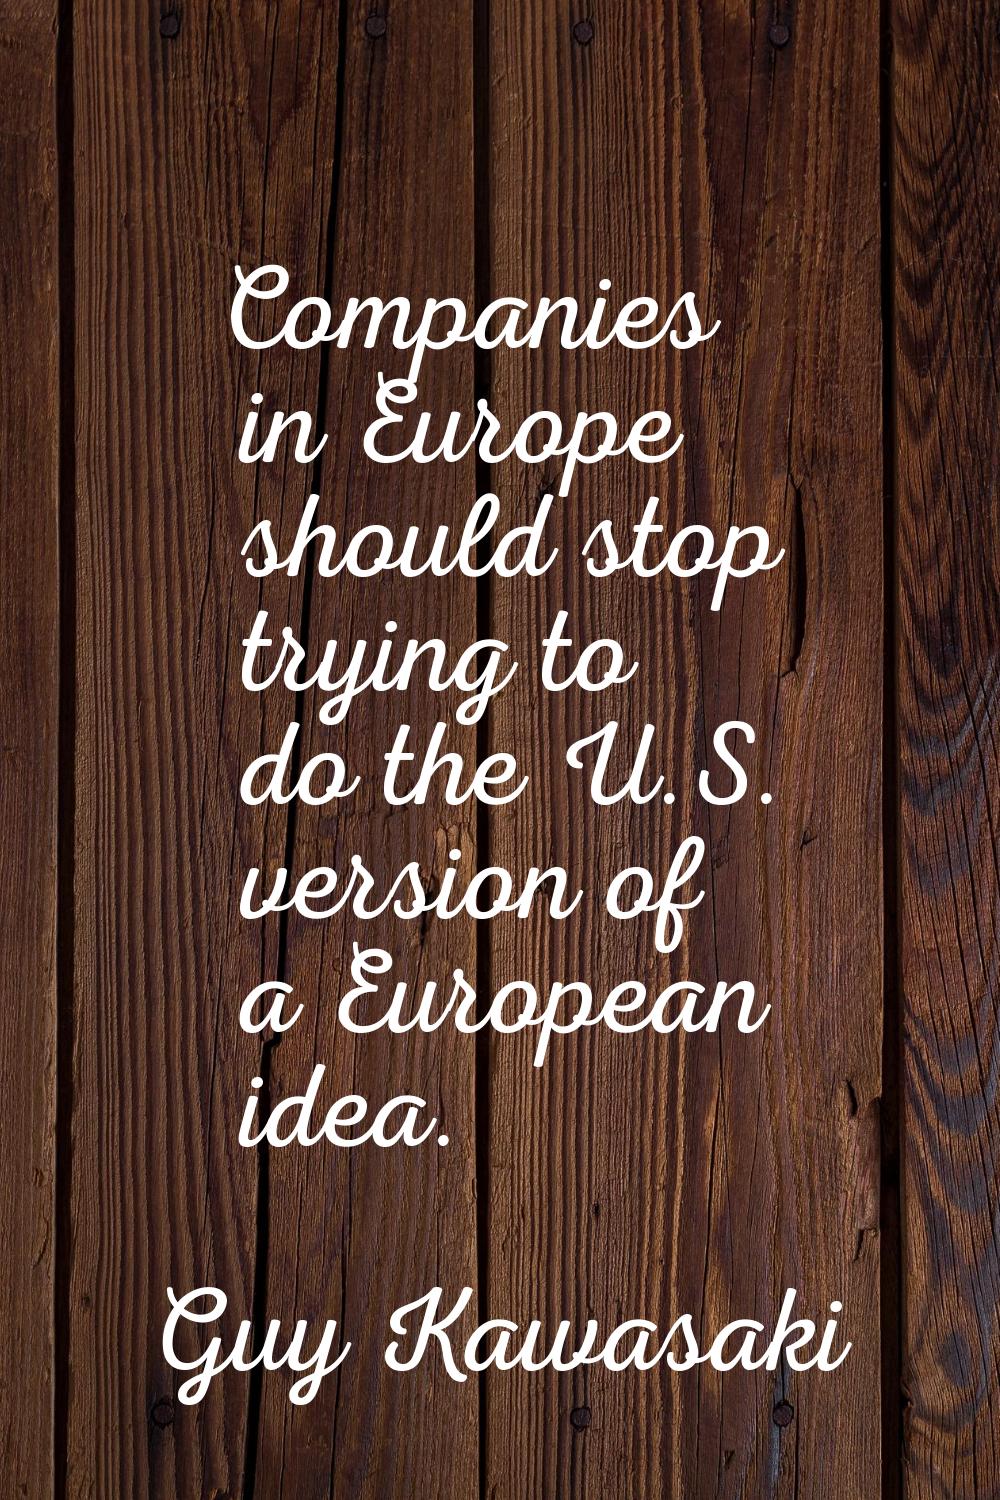 Companies in Europe should stop trying to do the U.S. version of a European idea.